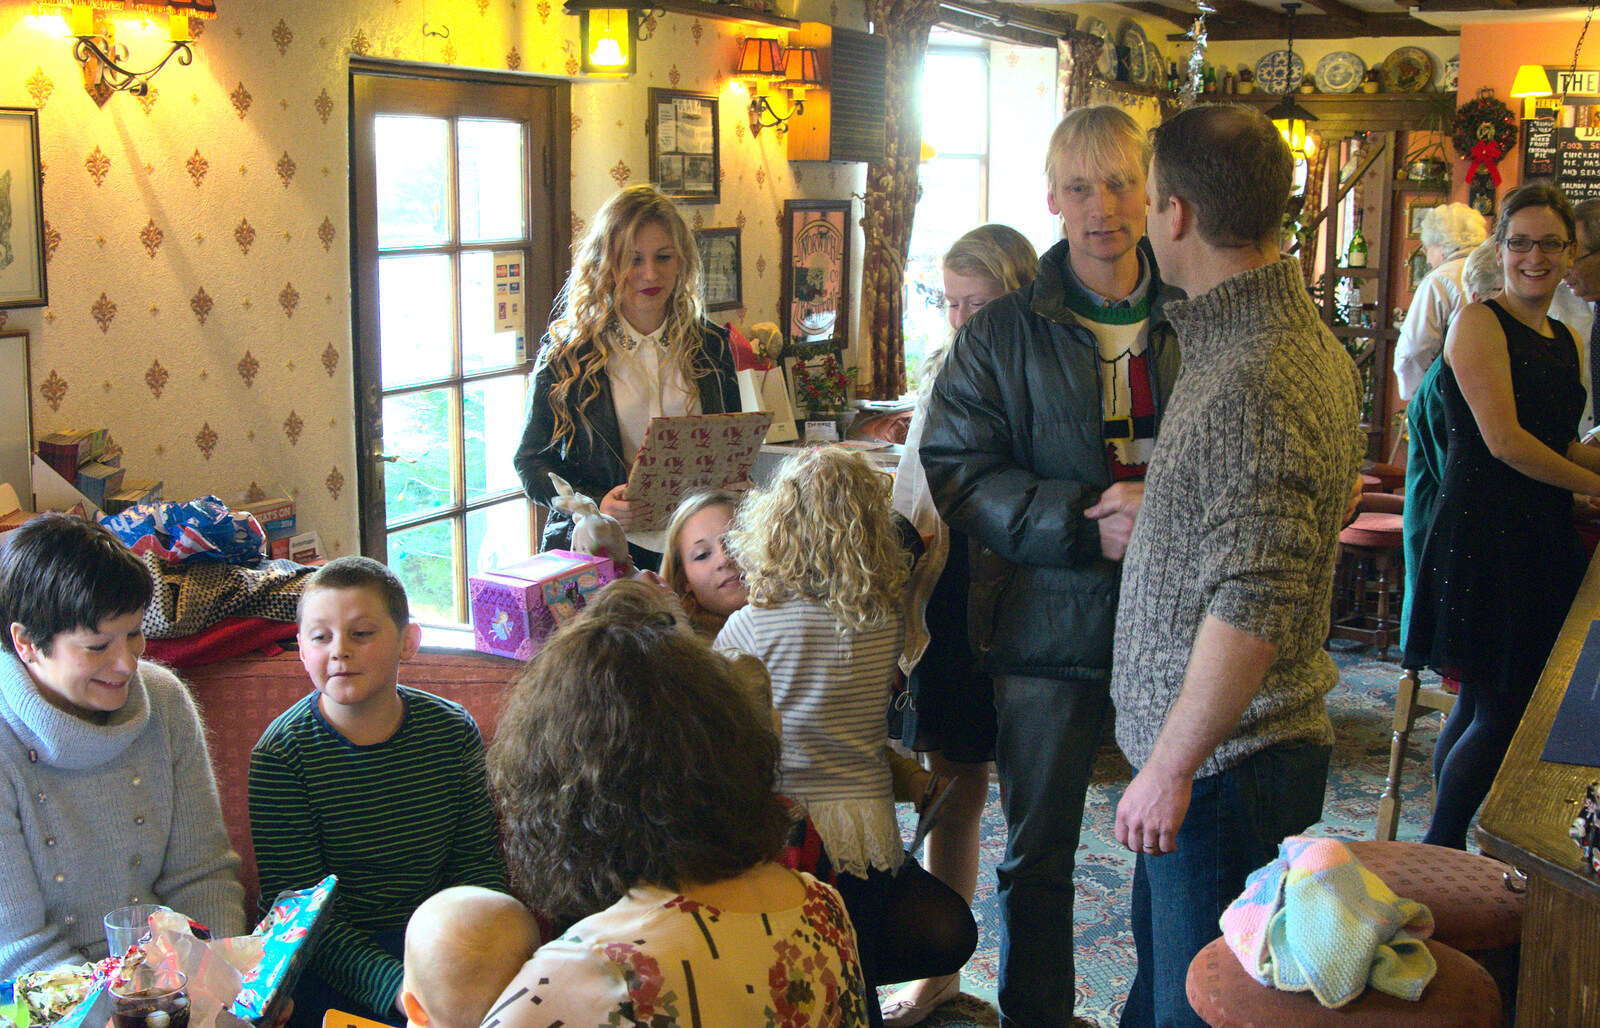 Jimmy and his girls arrive from Christmas Day at the Swan Inn, Brome, Suffolk - 25th December 2014